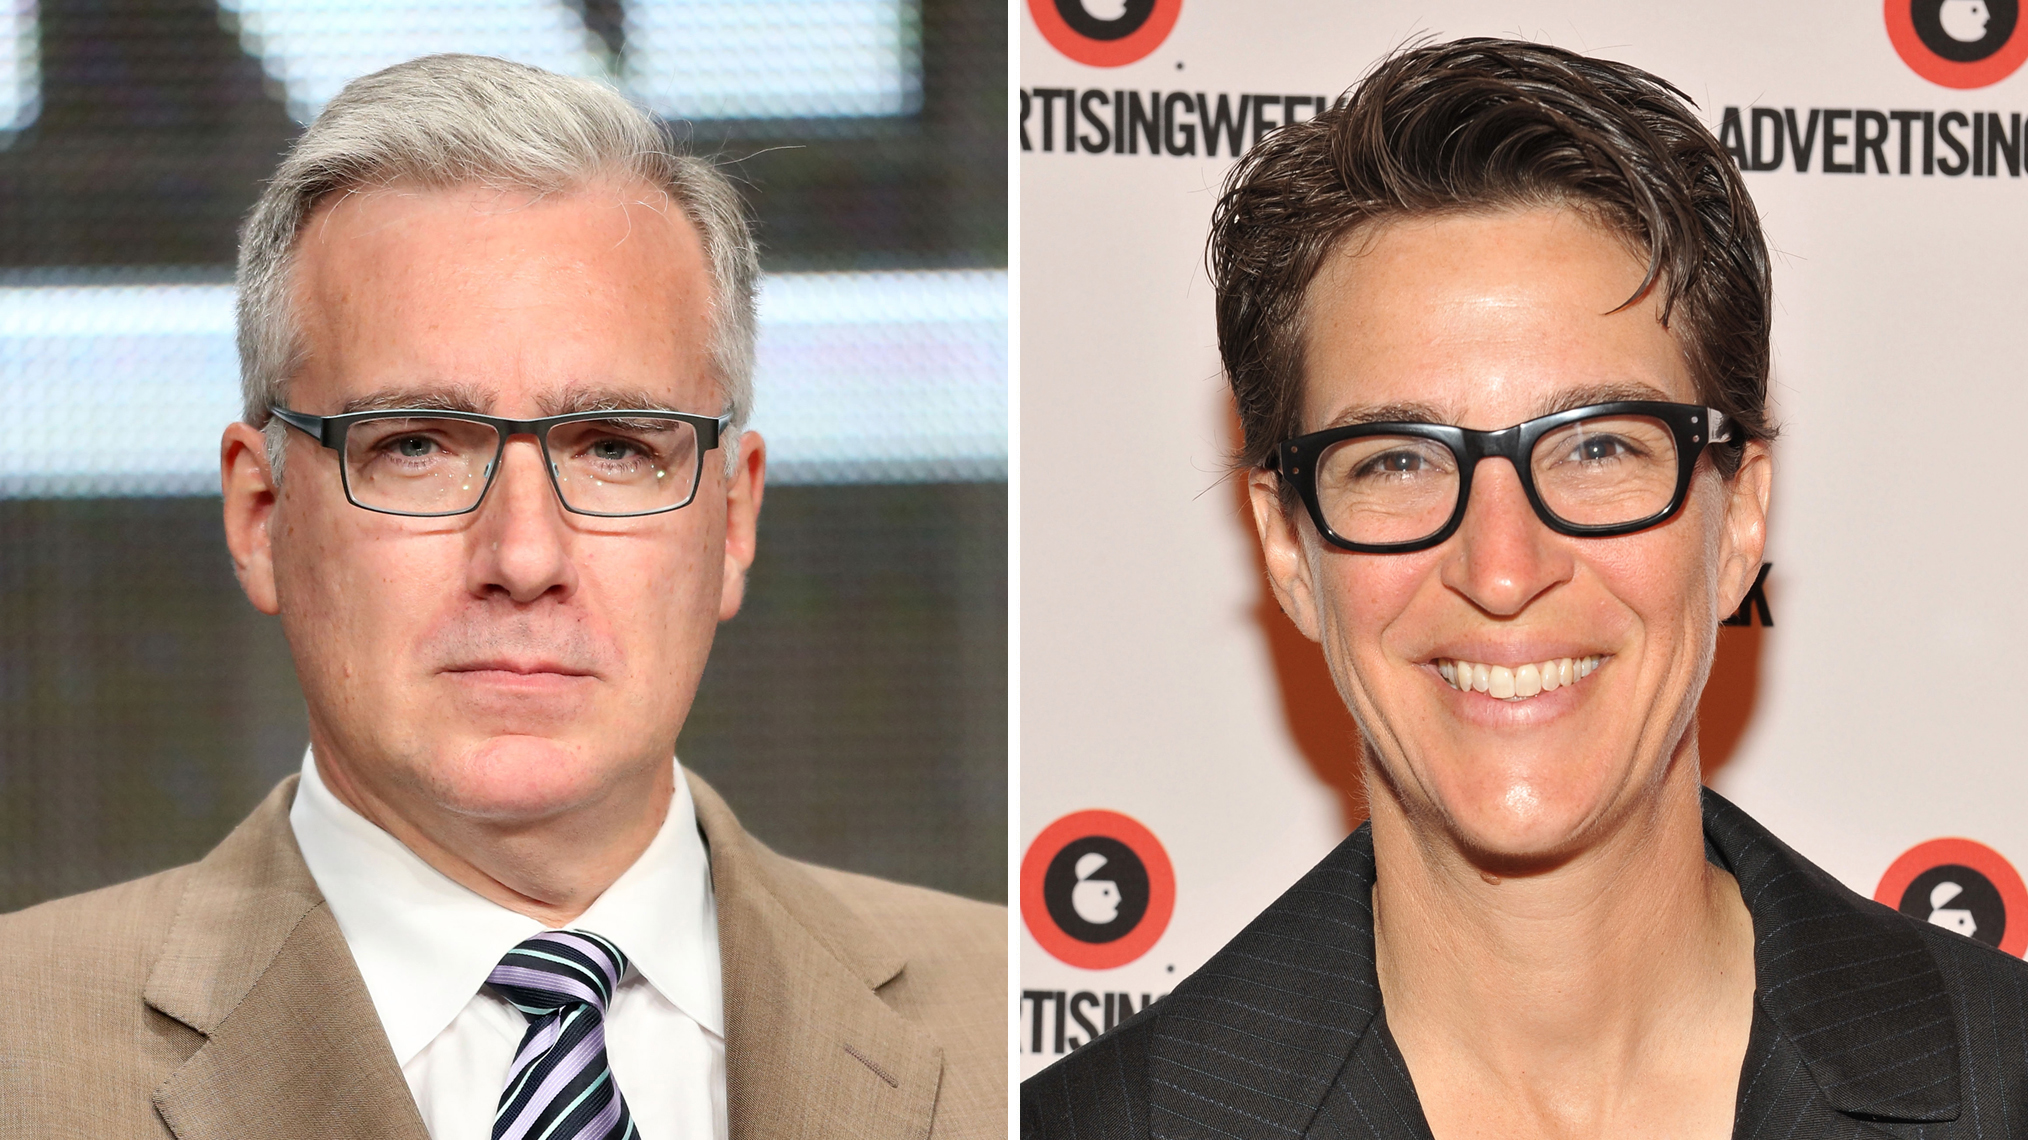 Keith Olbermann Addresses Rachel Maddow Beef and MSNBC Controversy